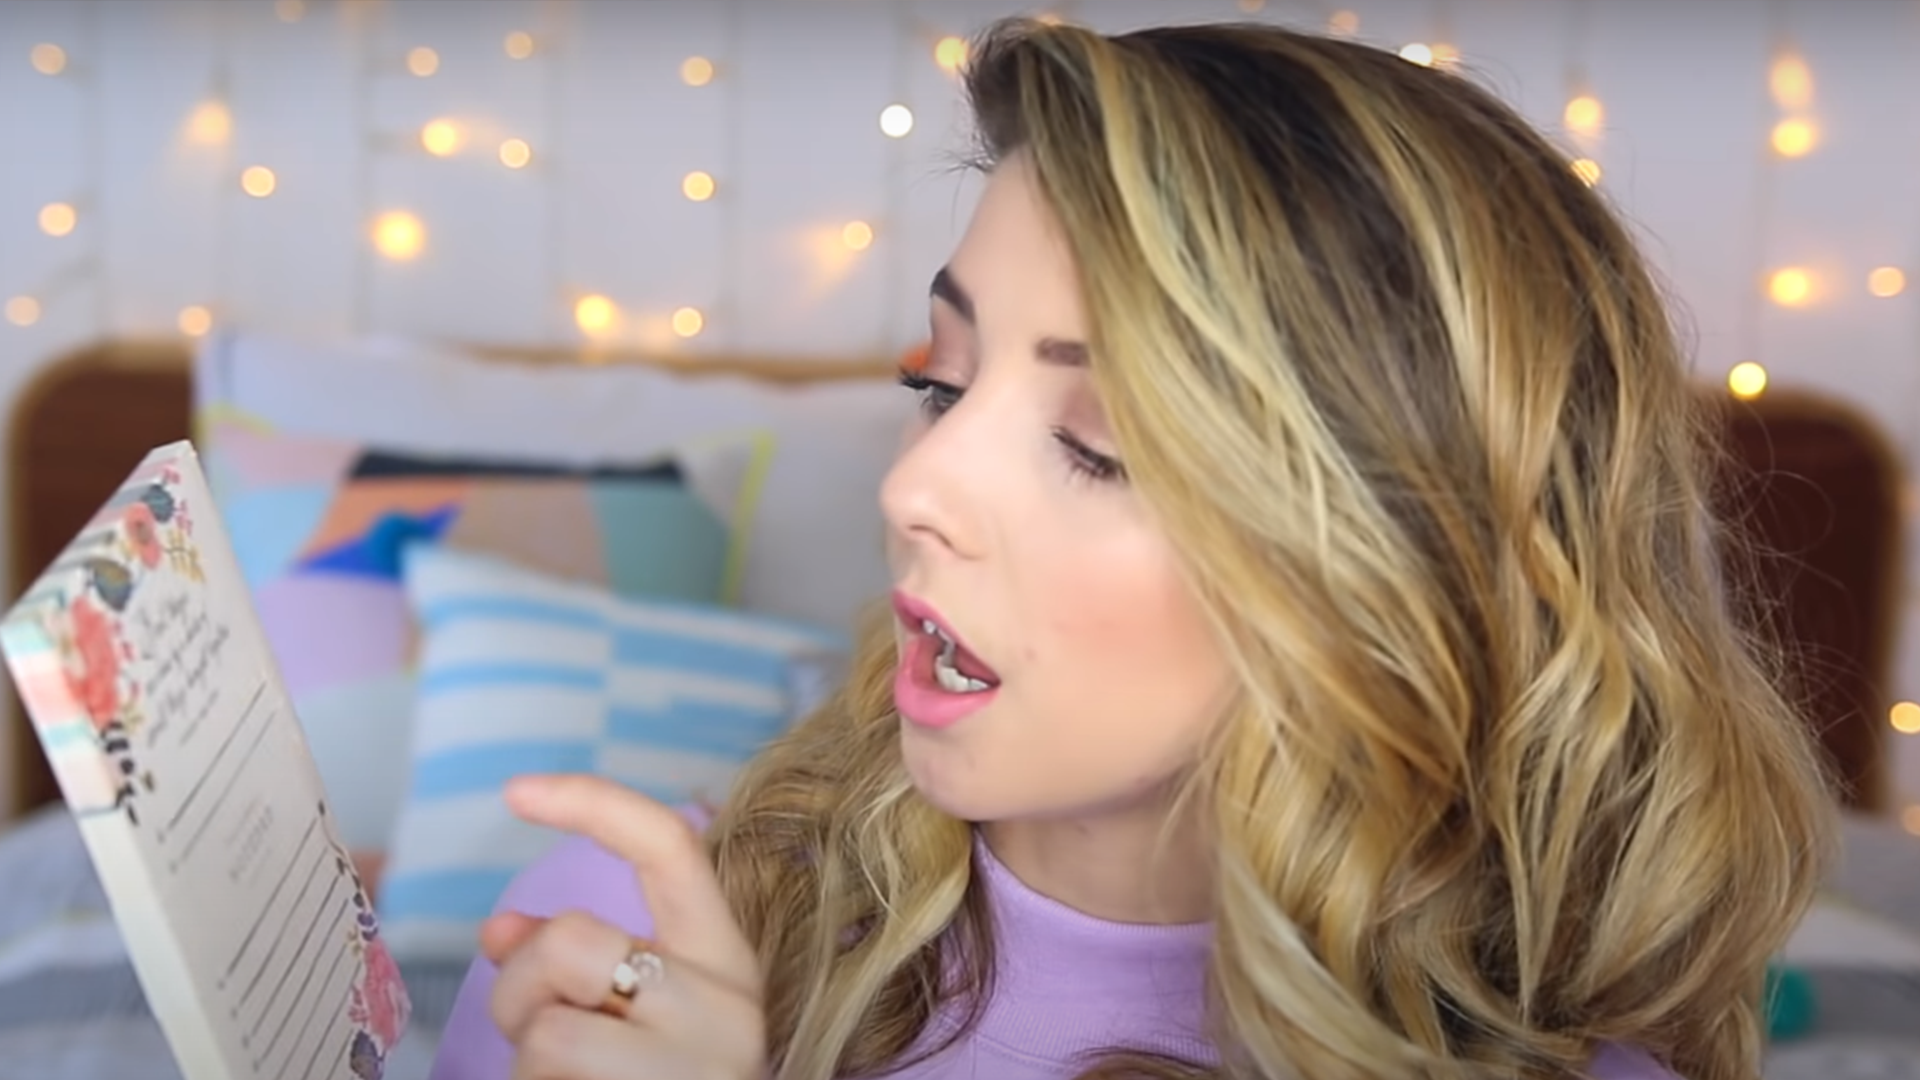 How Well Do You Know Zoella Zoella Youtuber Quiz On